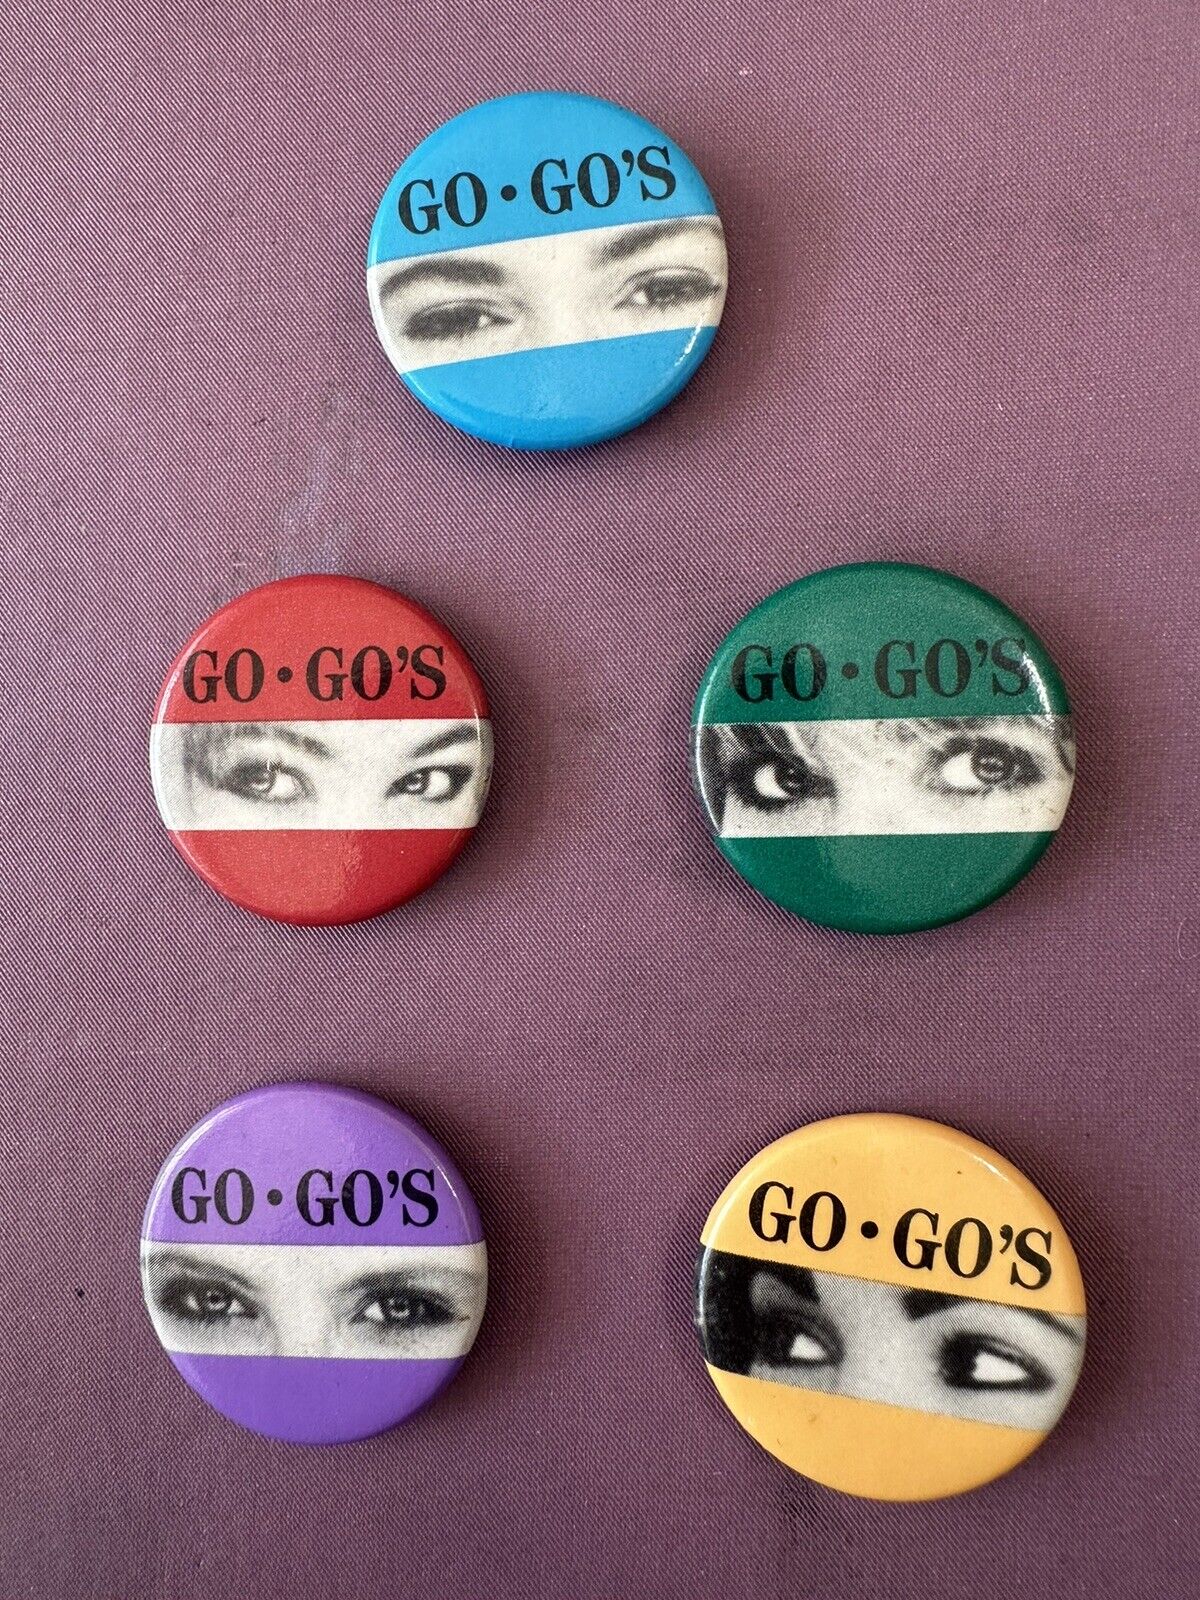 Vintage 1980s The GO-GOs band badge pin button lot